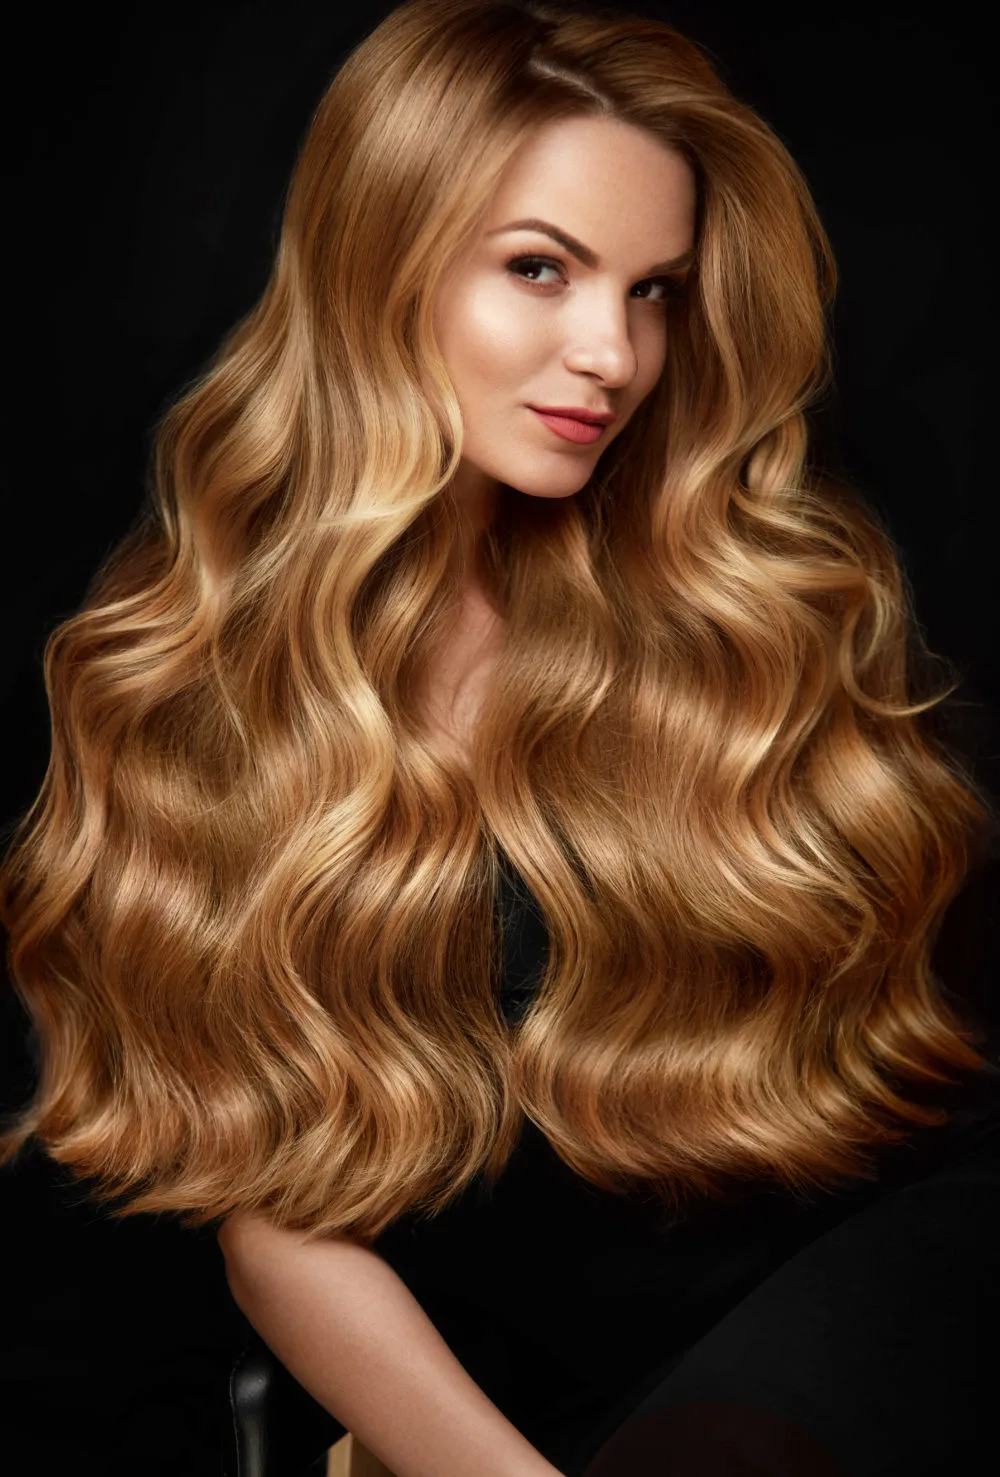 Flaxen Strawberry Blonde hair, one of the best colors for people with tan skin